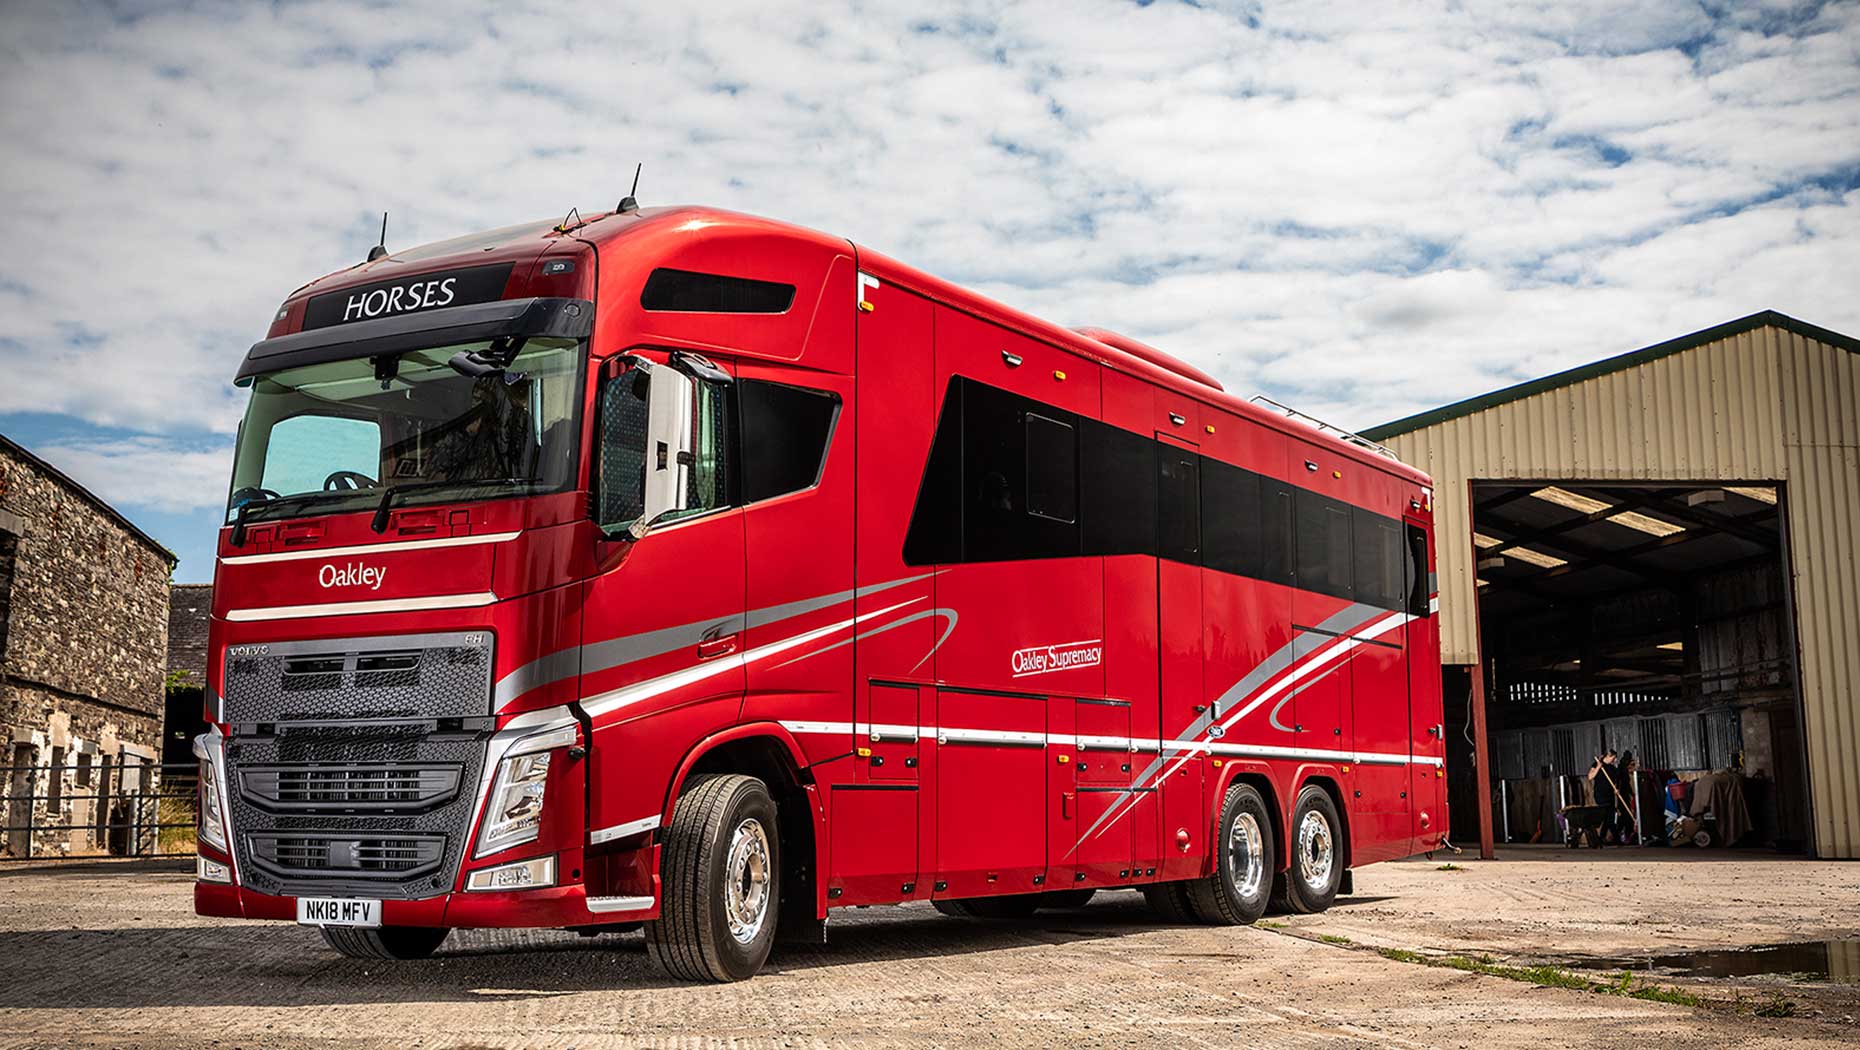 A New Volvo FH horsebox is a thoroughbred performer for Wicks Group